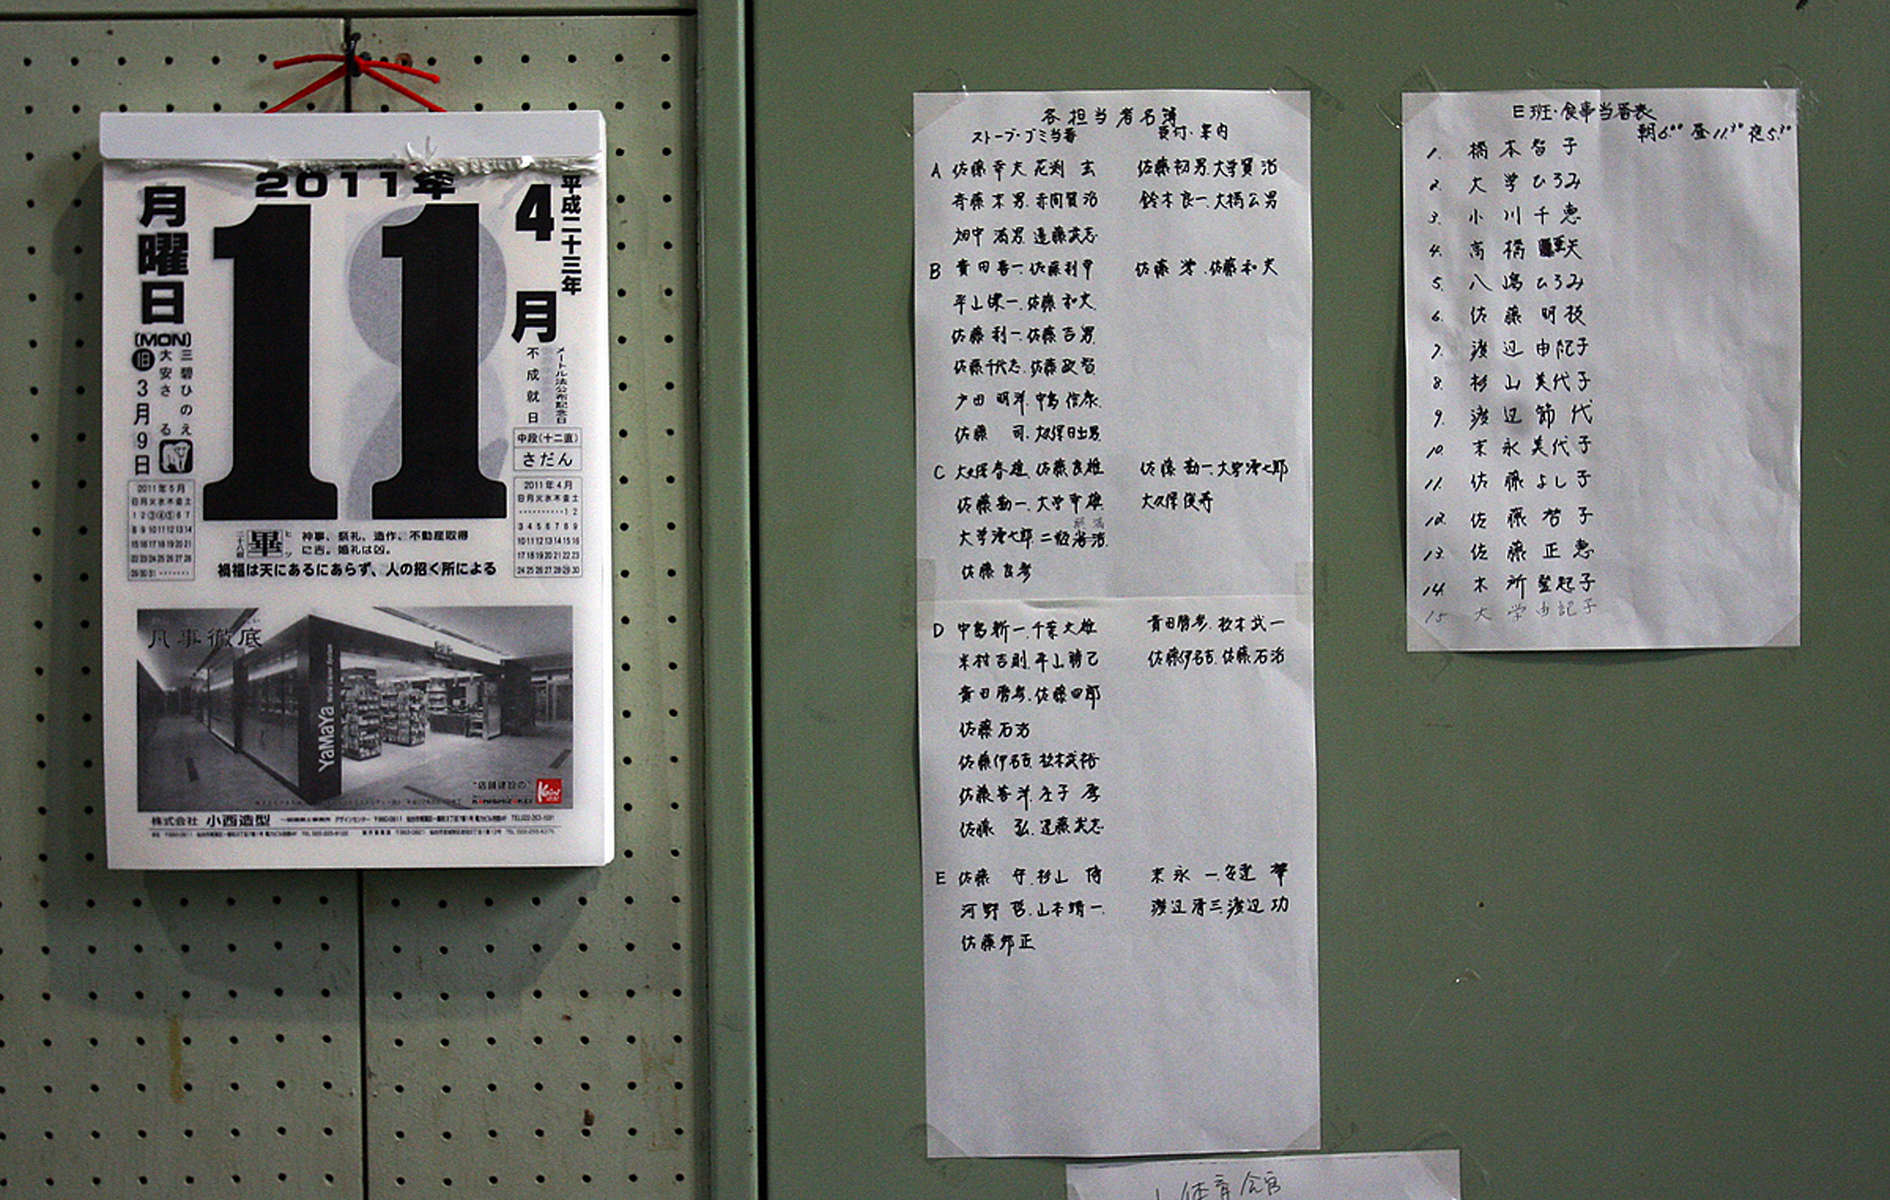 A calendar hangs on the wall of an evacuation center with the date and time when the tsunami hit Japan at 2:46 p.m., on March 11, 2011. (The Press-Enterprise/ Mark Zaleski)